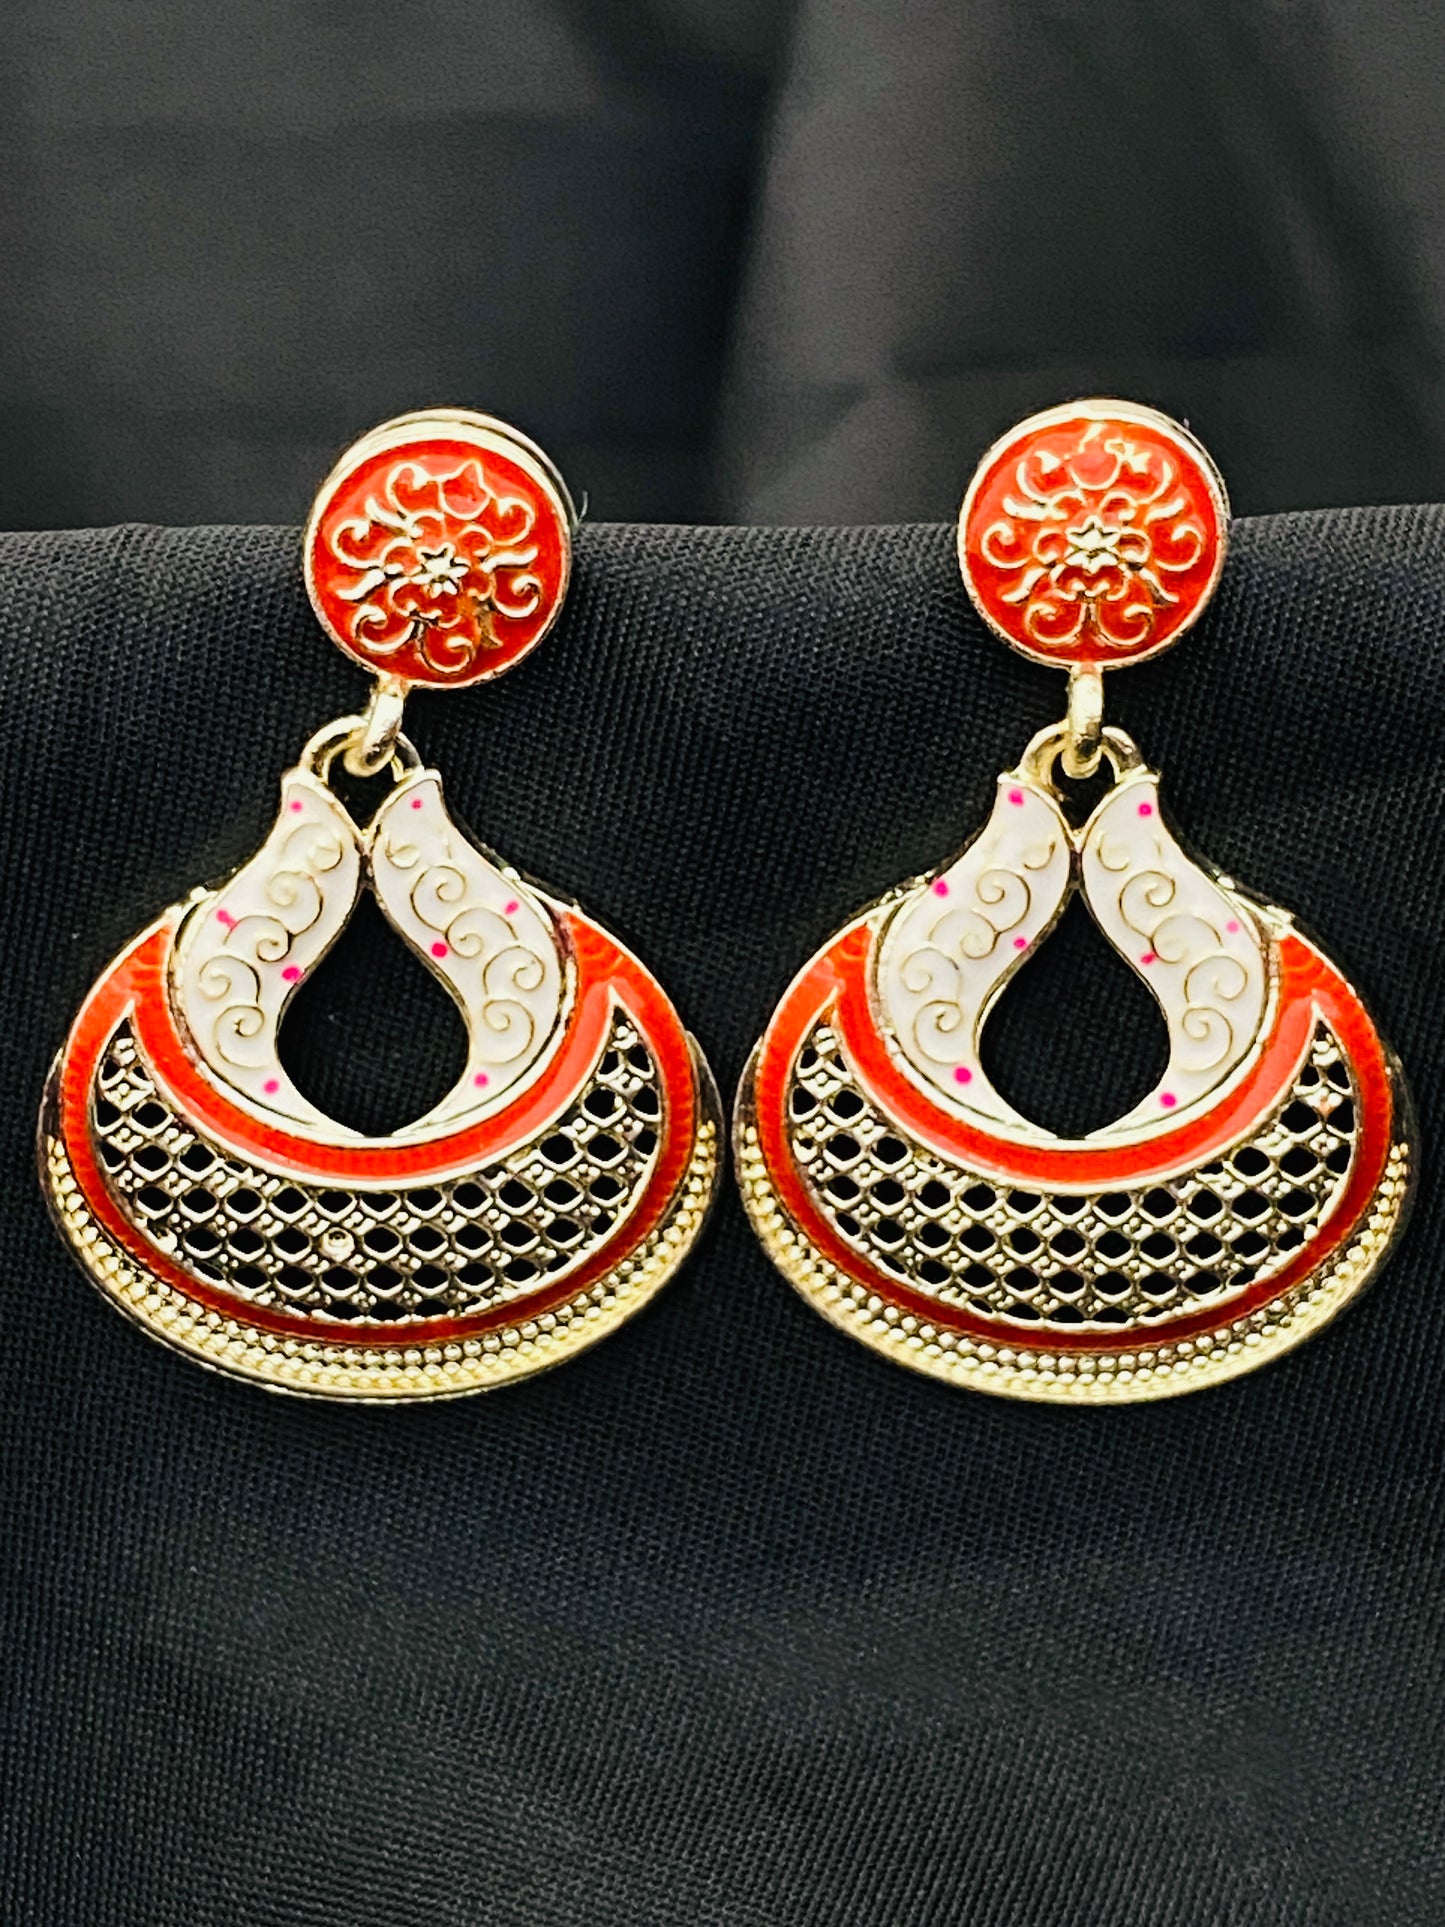 Attractive Red Color Oxidized Chaandbali Style Desinger Earrings For Women